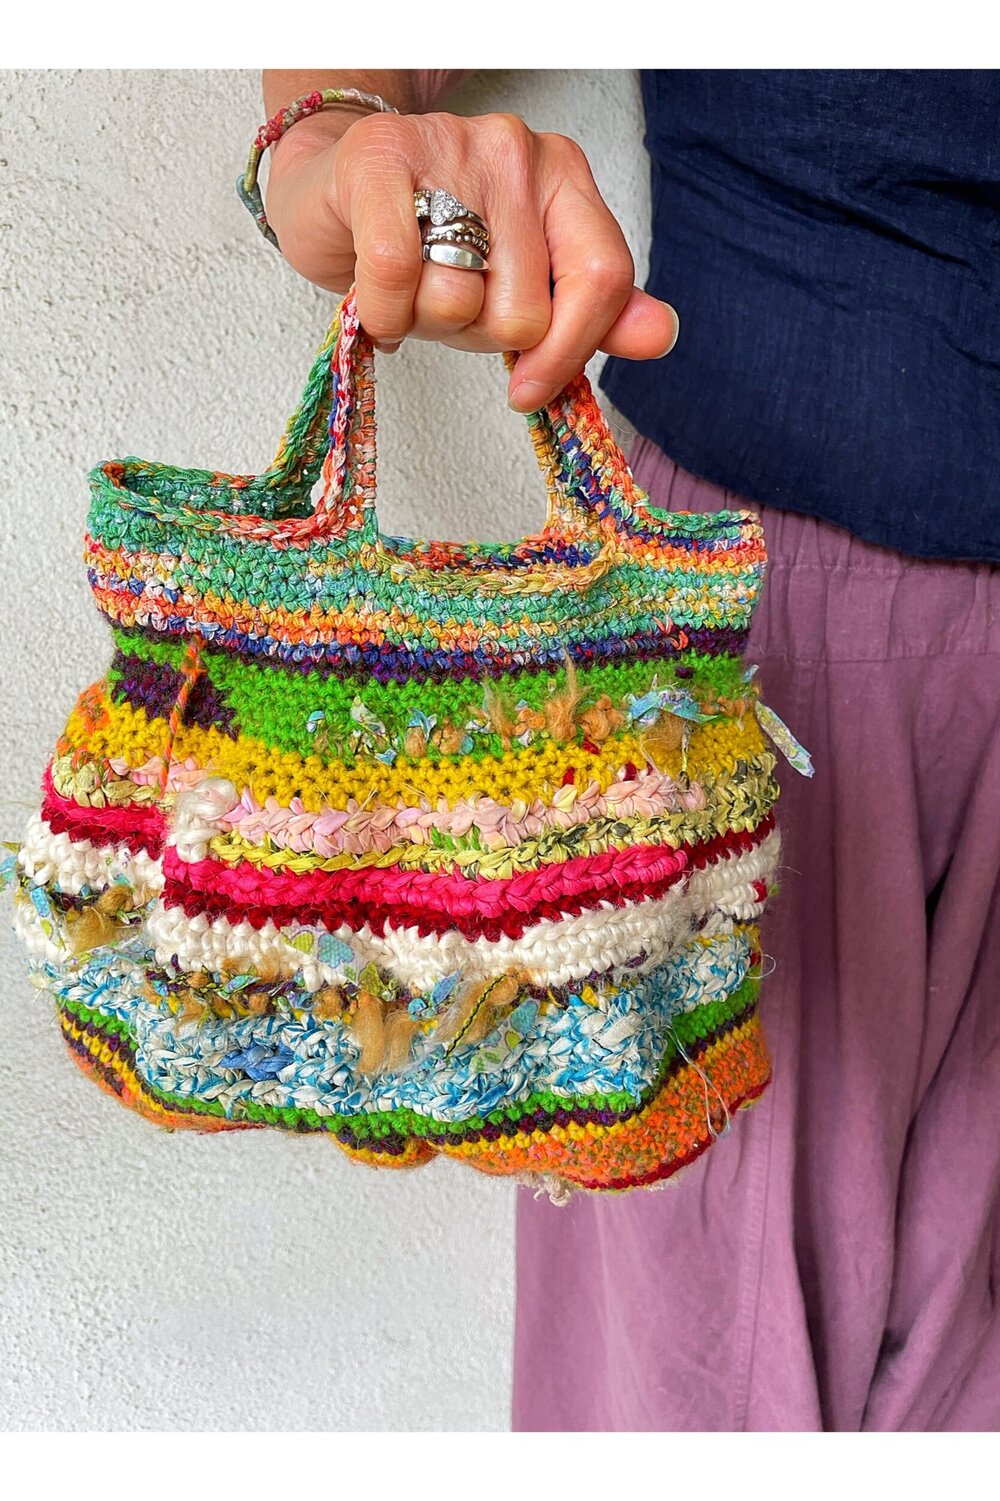 Crochet Rainbow Bag / Purse - New! - clothing & accessories - by